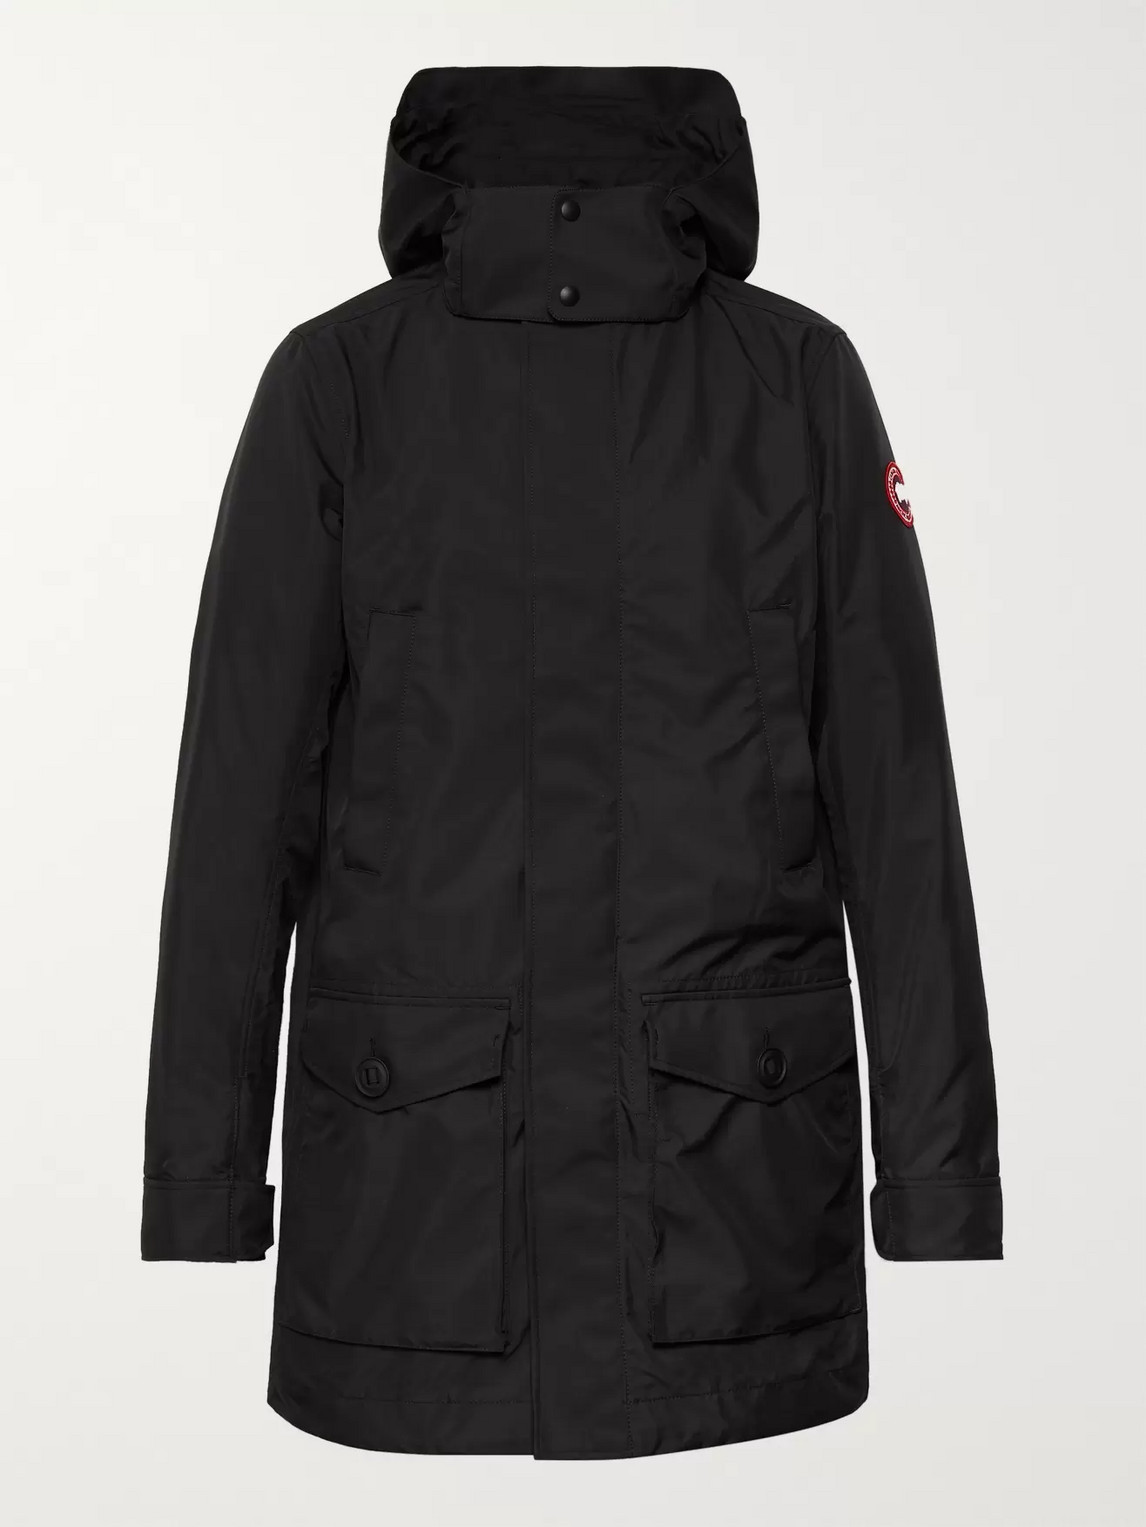 CANADA GOOSE CREW DURA-FORCE LIGHT SHELL HOODED JACKET